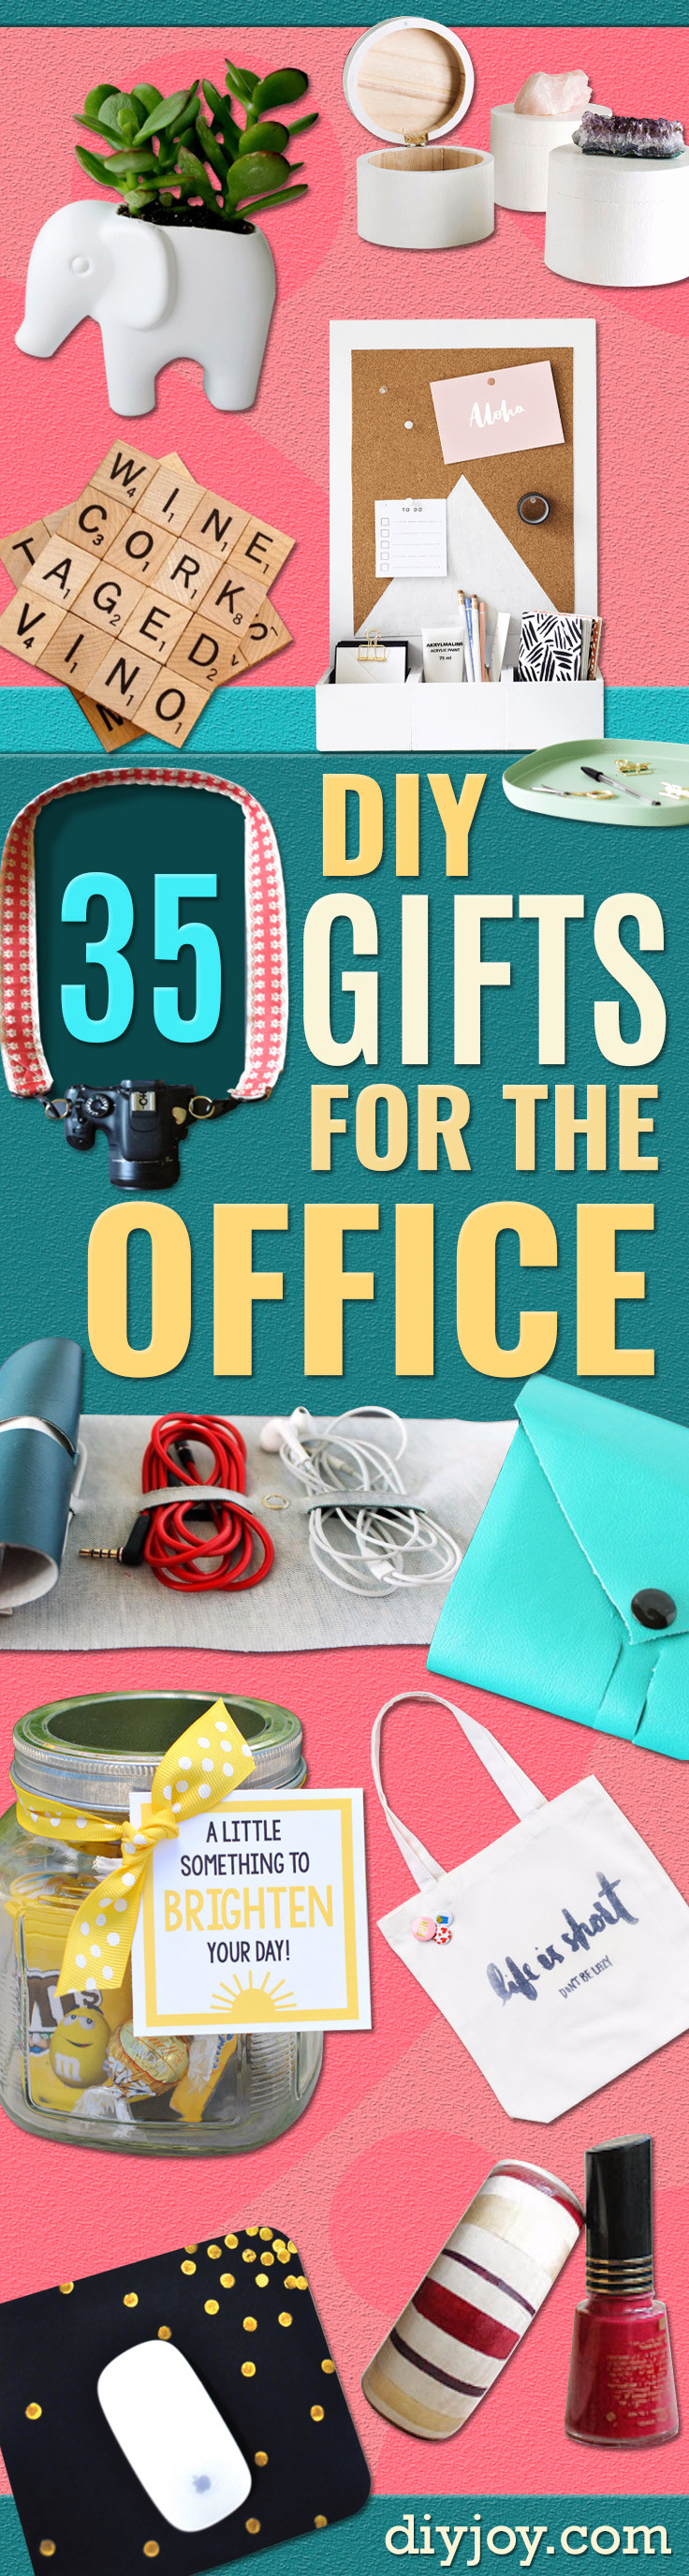 Office Christmas Gift Ideas
 35 Cheap and Easy Gifts for The fice